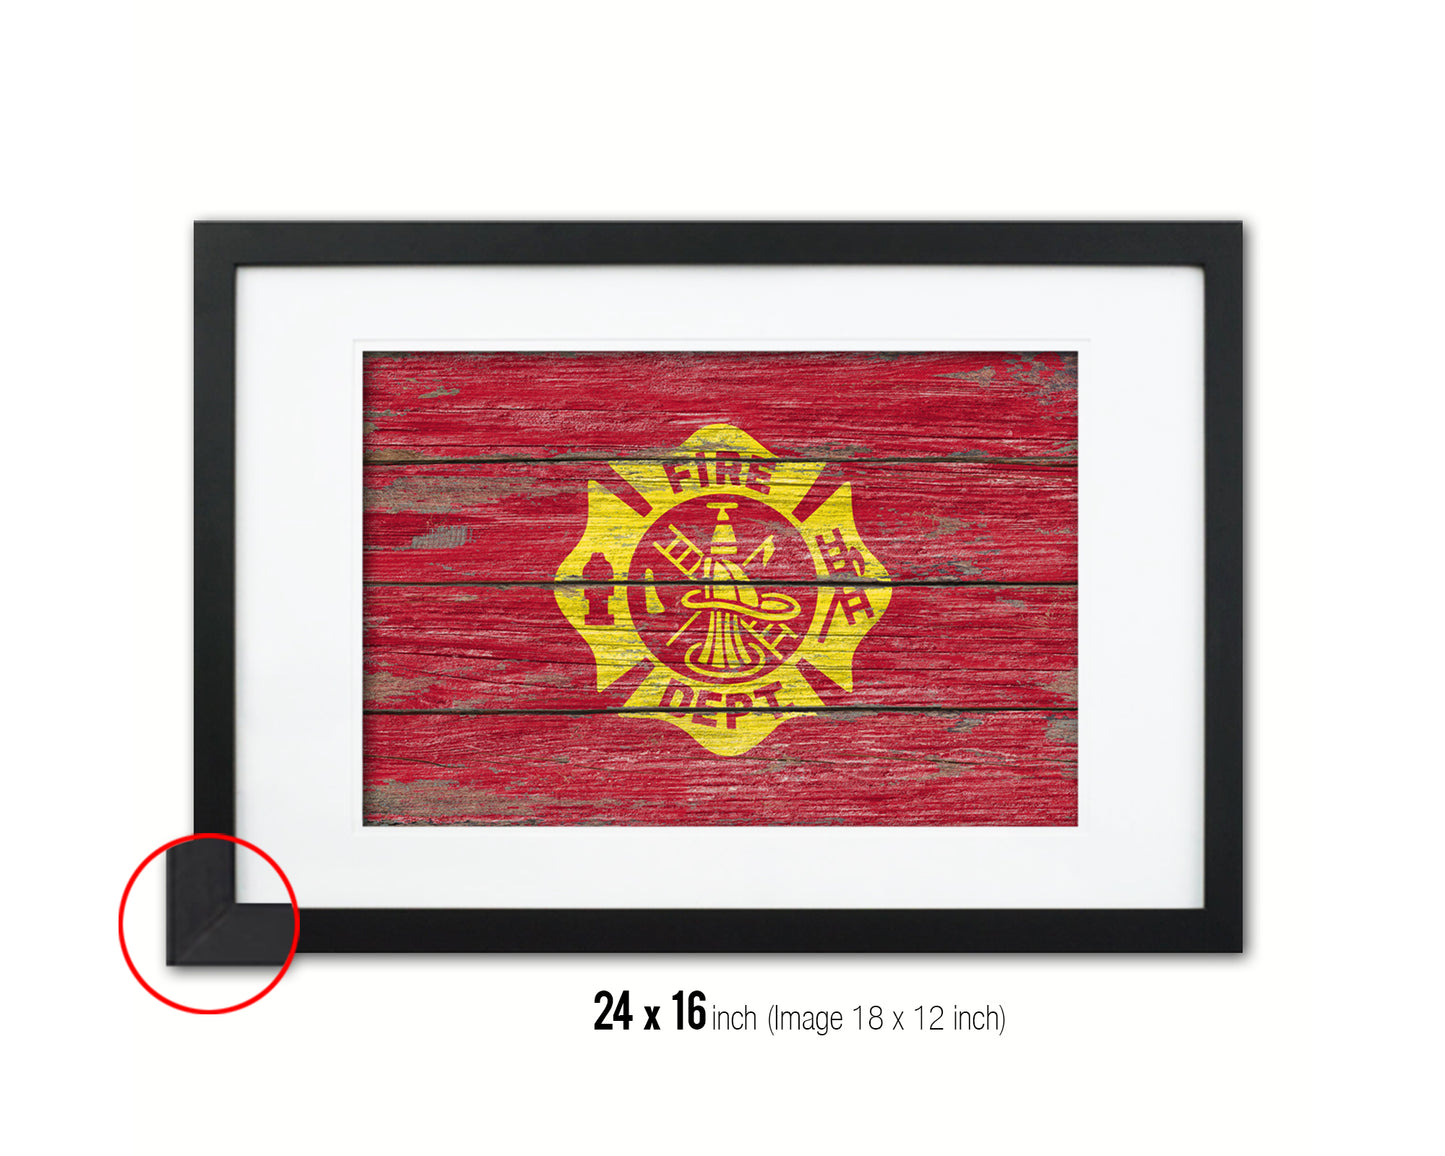 Fire Department Fire Fighter Wood Rustic Flag Wood Framed Print Wall Art Decor Gifts